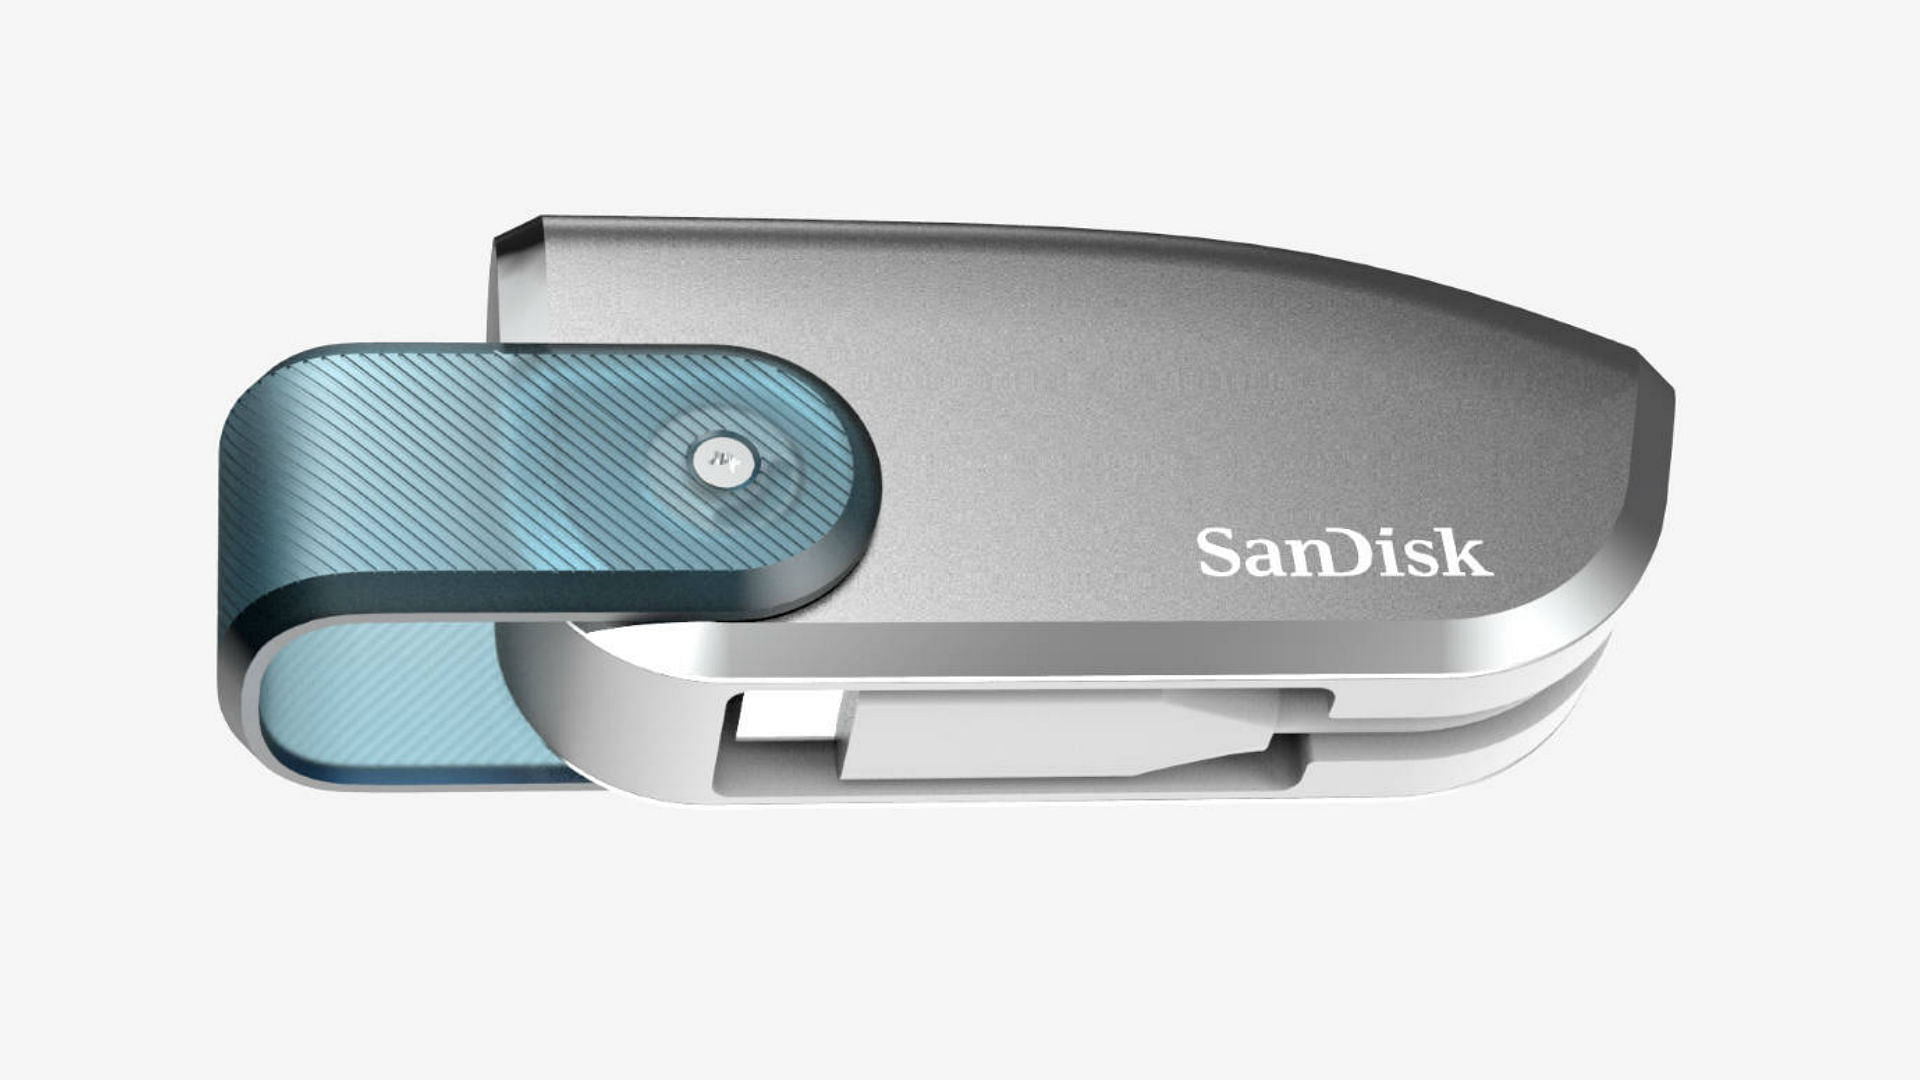 Sandisk has showcased yet another storage marvel at CES this year.&nbsp;